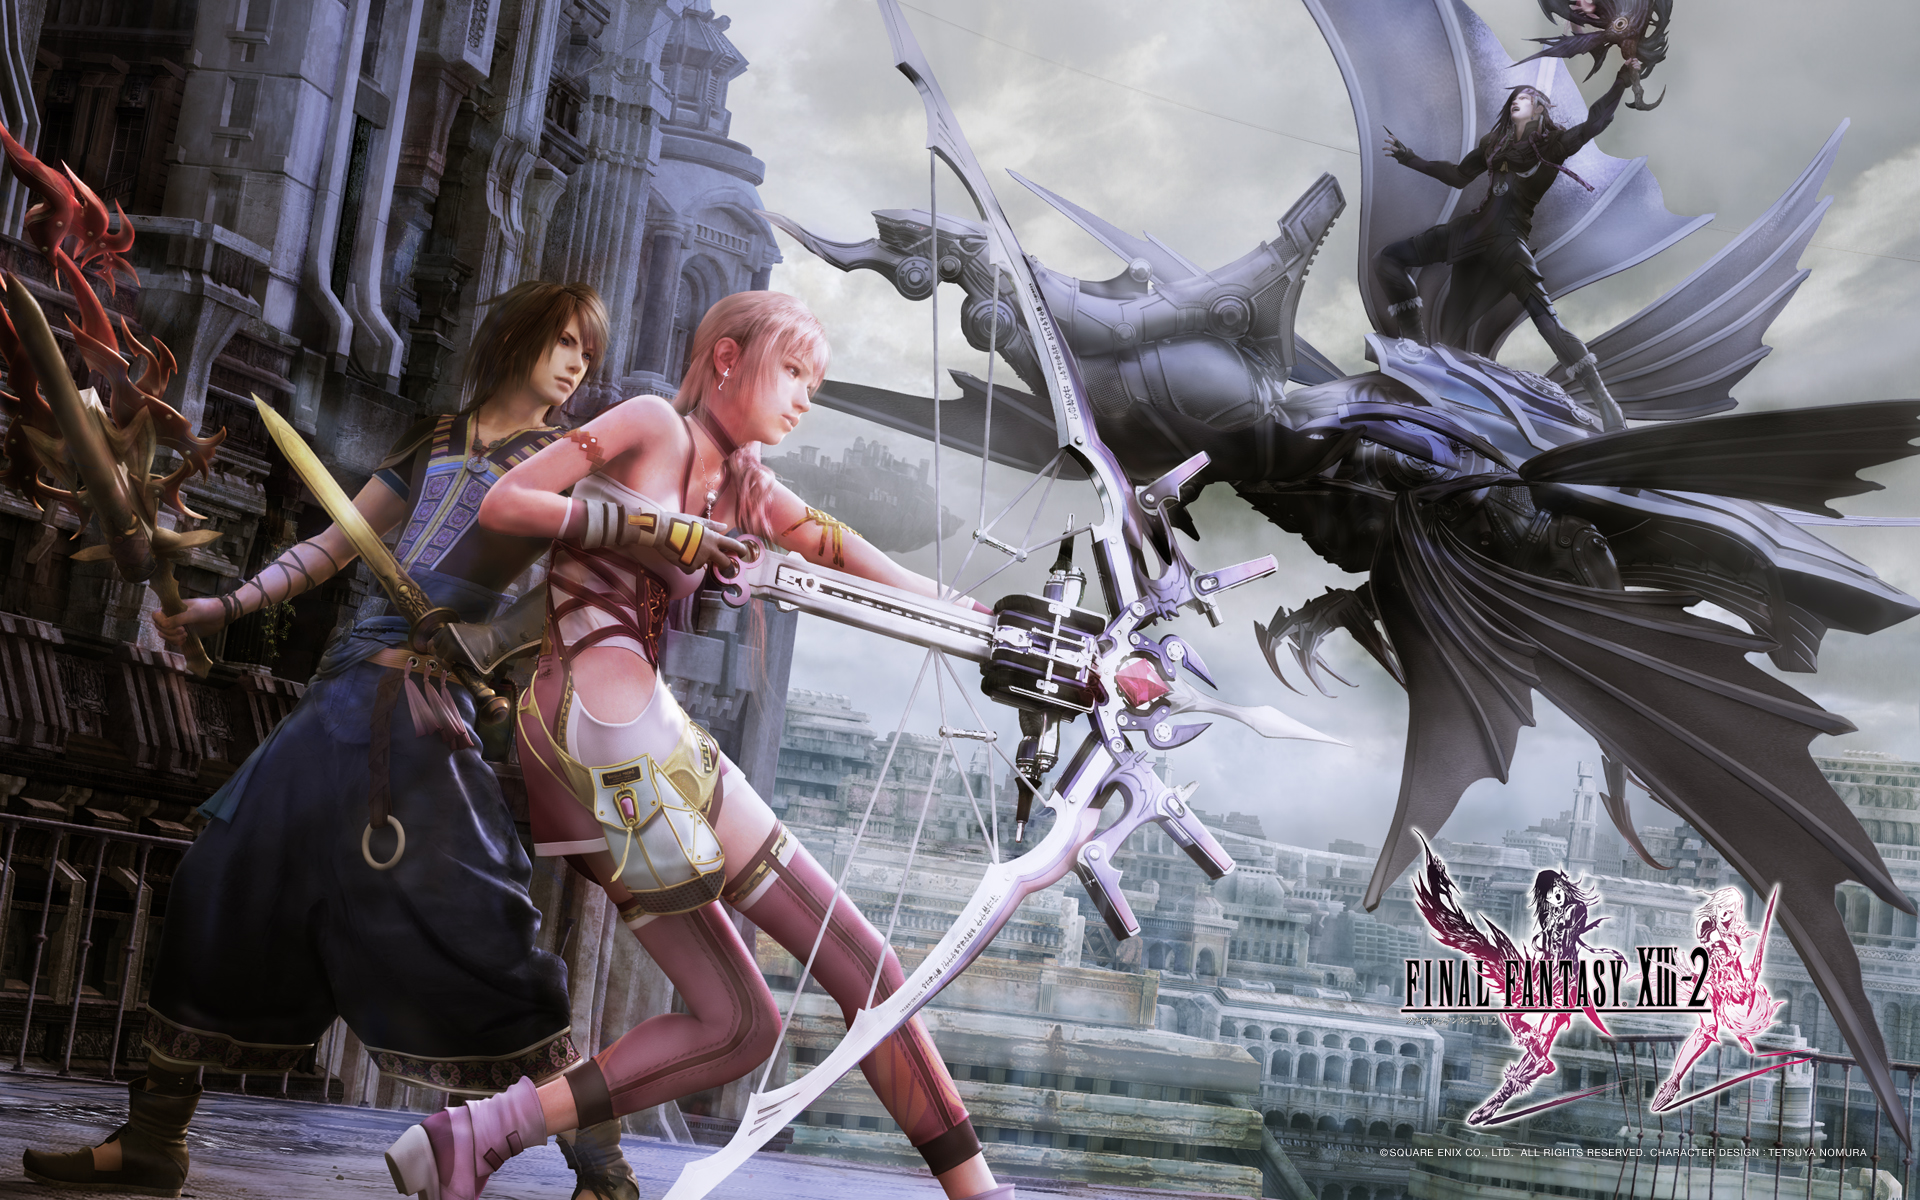 Final Fantasy Xiii 2 On Pc To Includes Dlcs But Not All Load The Game